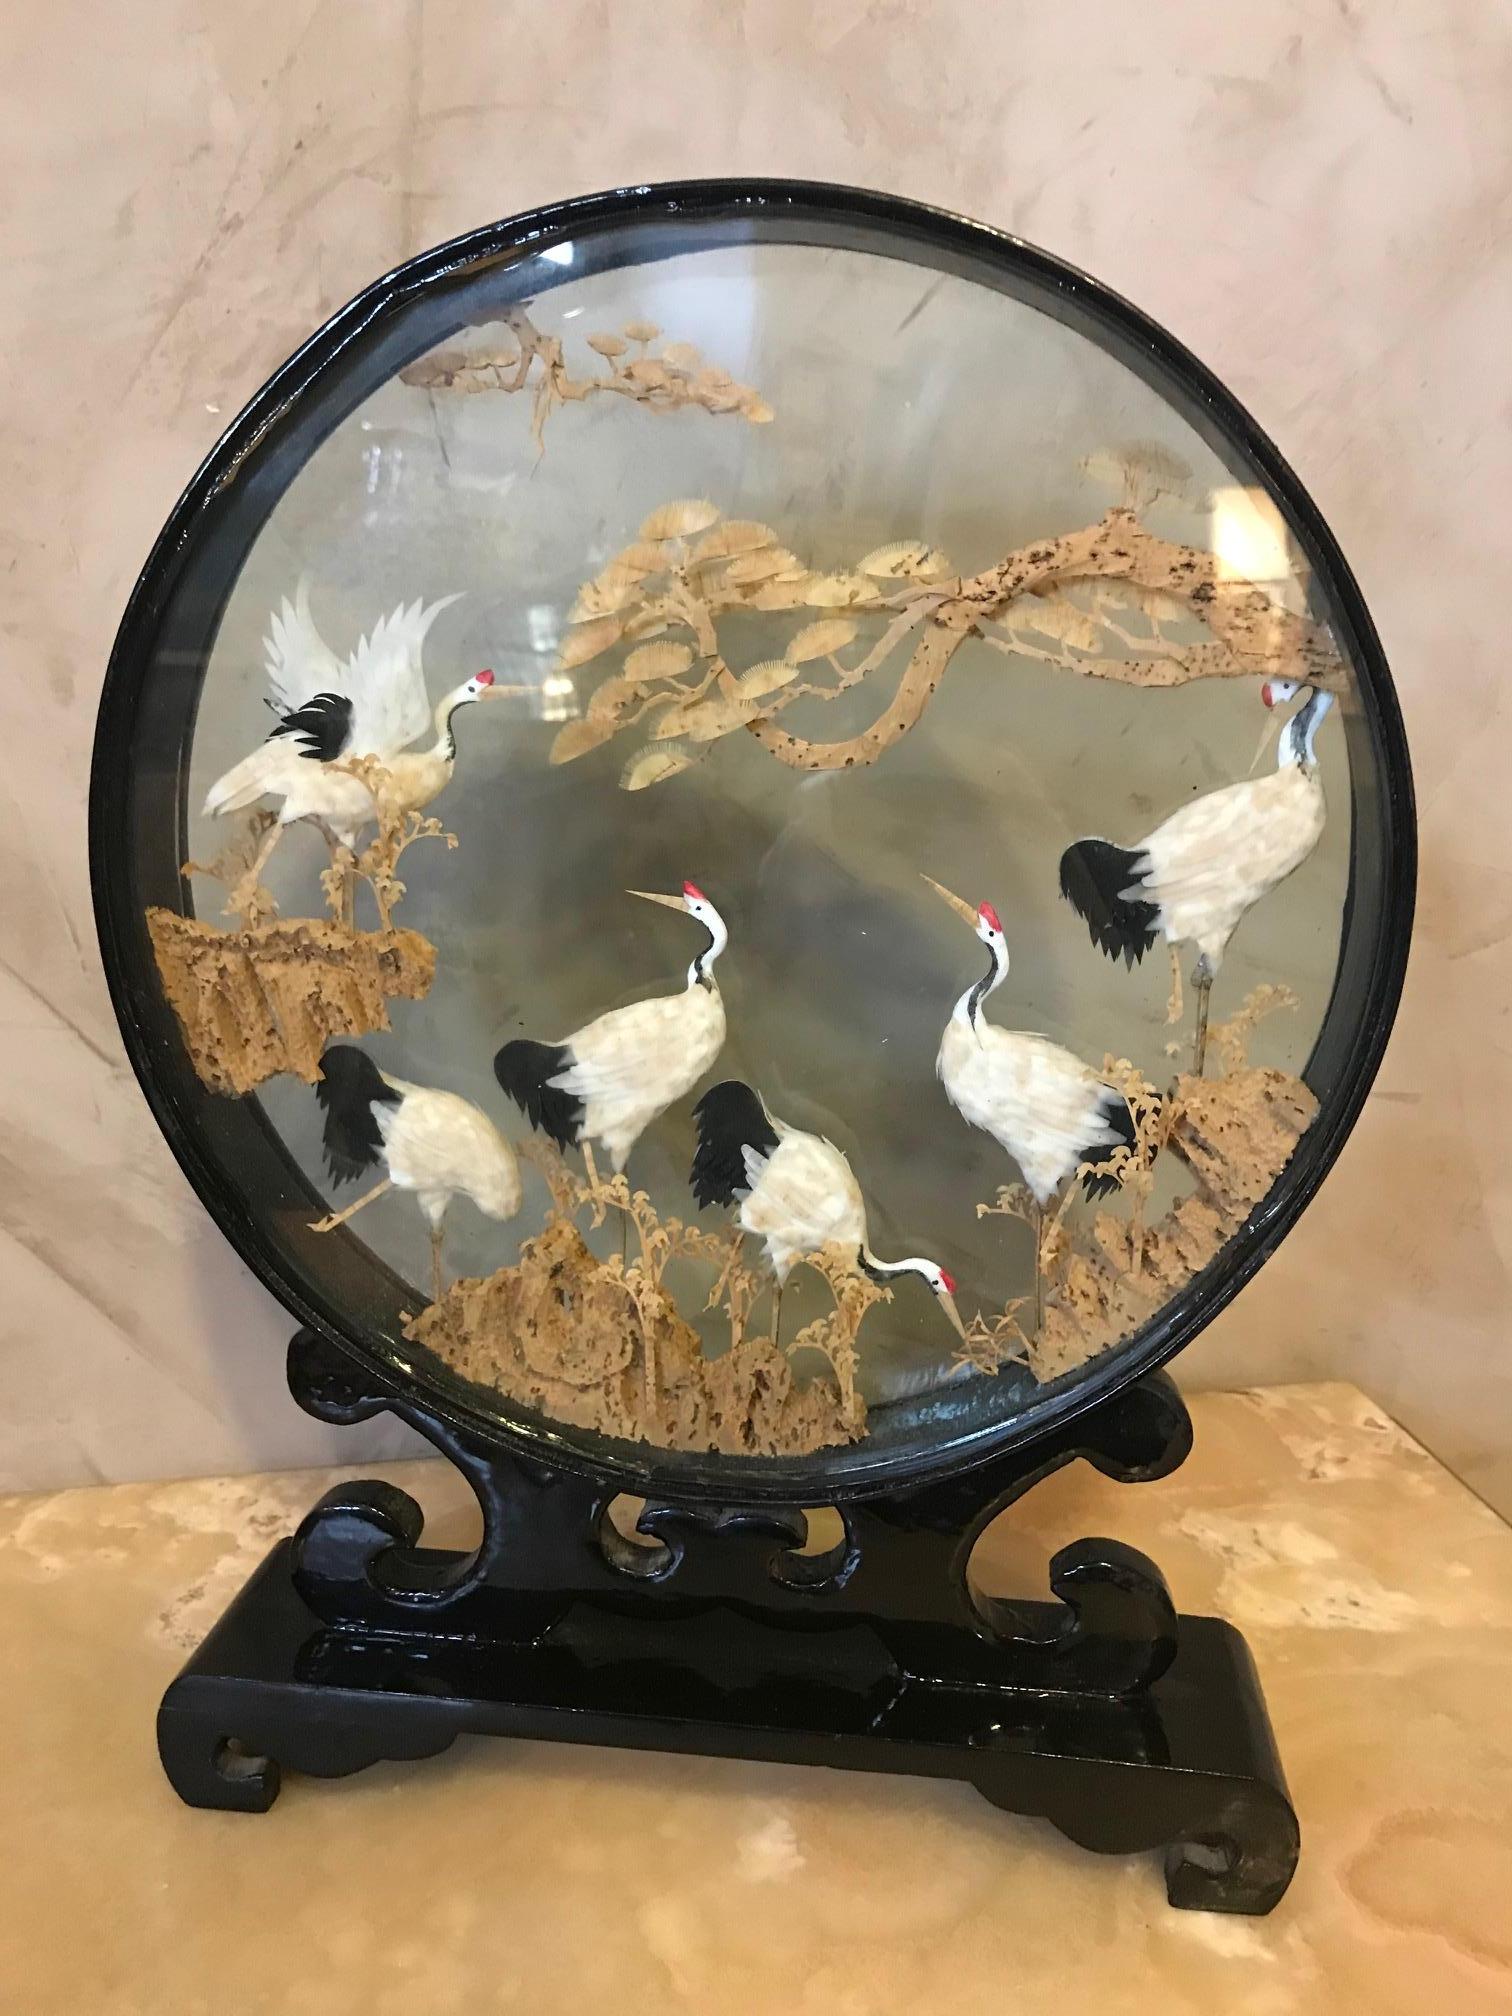 Chinese diorama made of vintage cork in glass and lacquered wood. Finely carved decoration in its glass case and brown lacquered base. Careful and delicate work of miniature sculpture, representing a Chinese landscape view, with many storks on